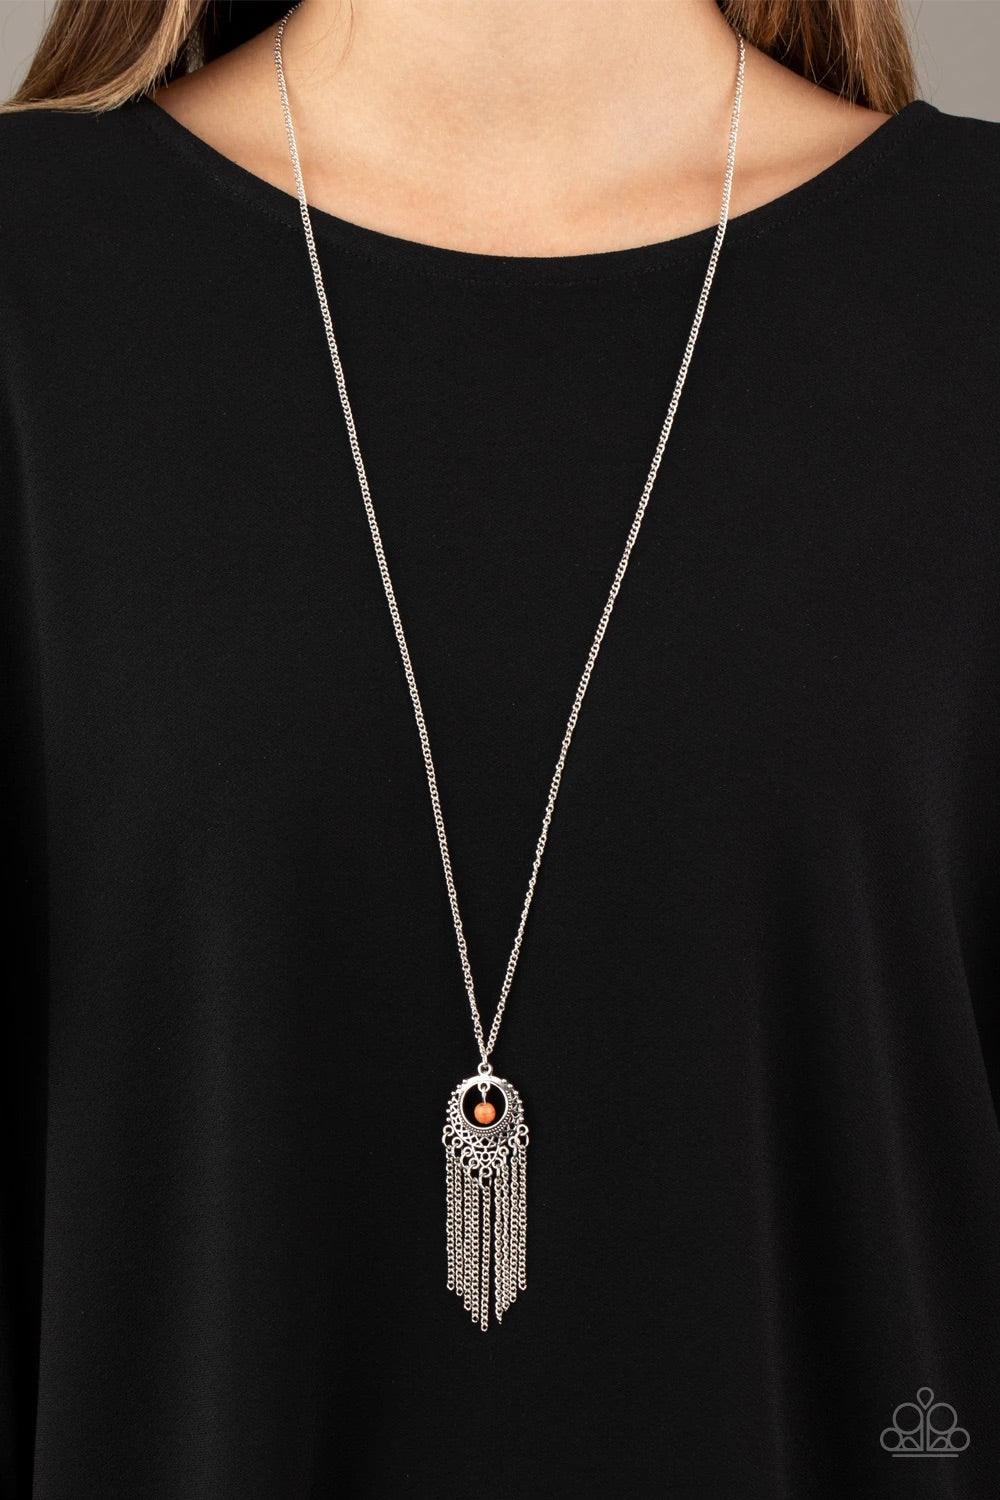 Paparazzi Accessories Western Weather - Orange A vivacious orange stone bead swings from the top of an ornate silver frame. Infused with a tapered tassel, the whimsical pendant swings from the bottom of an elongated silver chain for a wanderlust finish. F